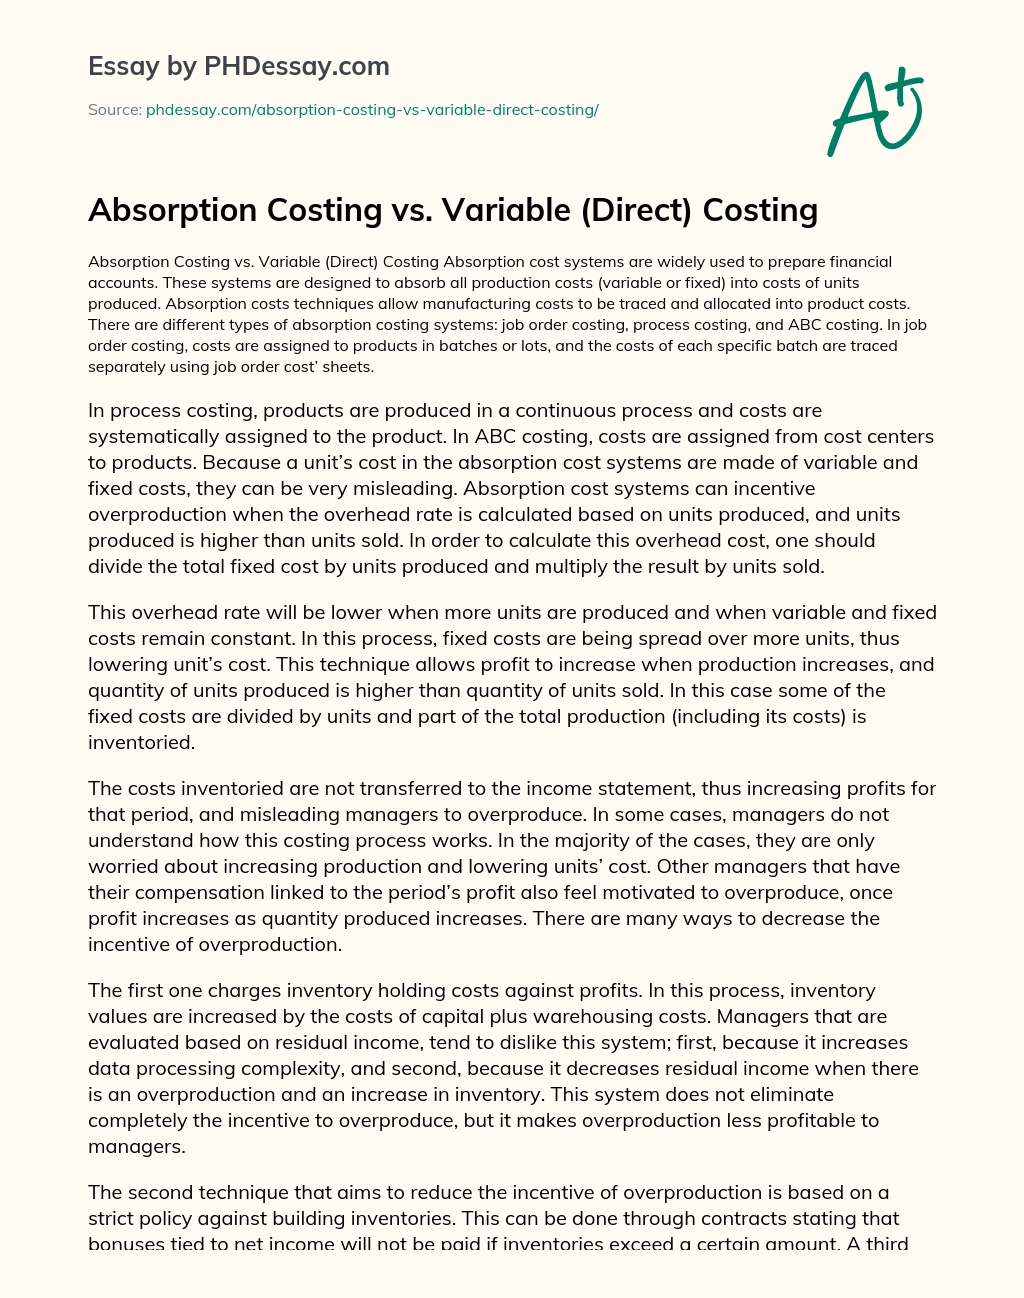 Absorption Costing vs. Variable (Direct) Costing essay